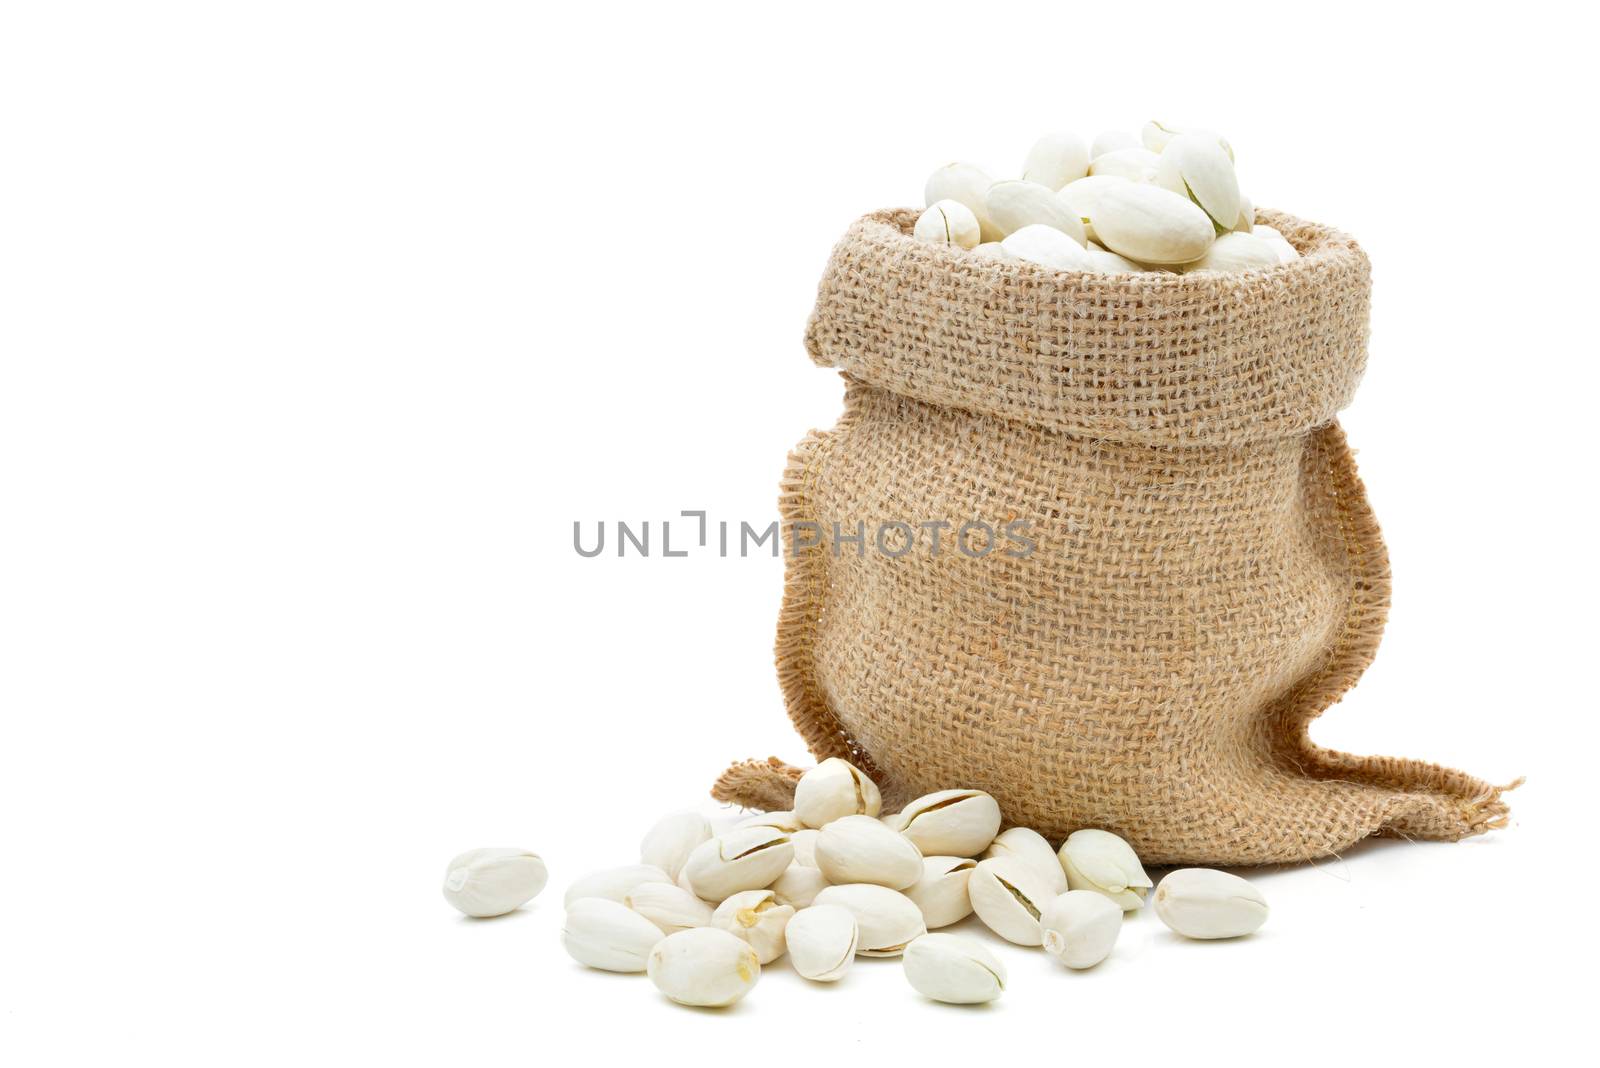 Pistachio in a sack on a white background by sompongtom